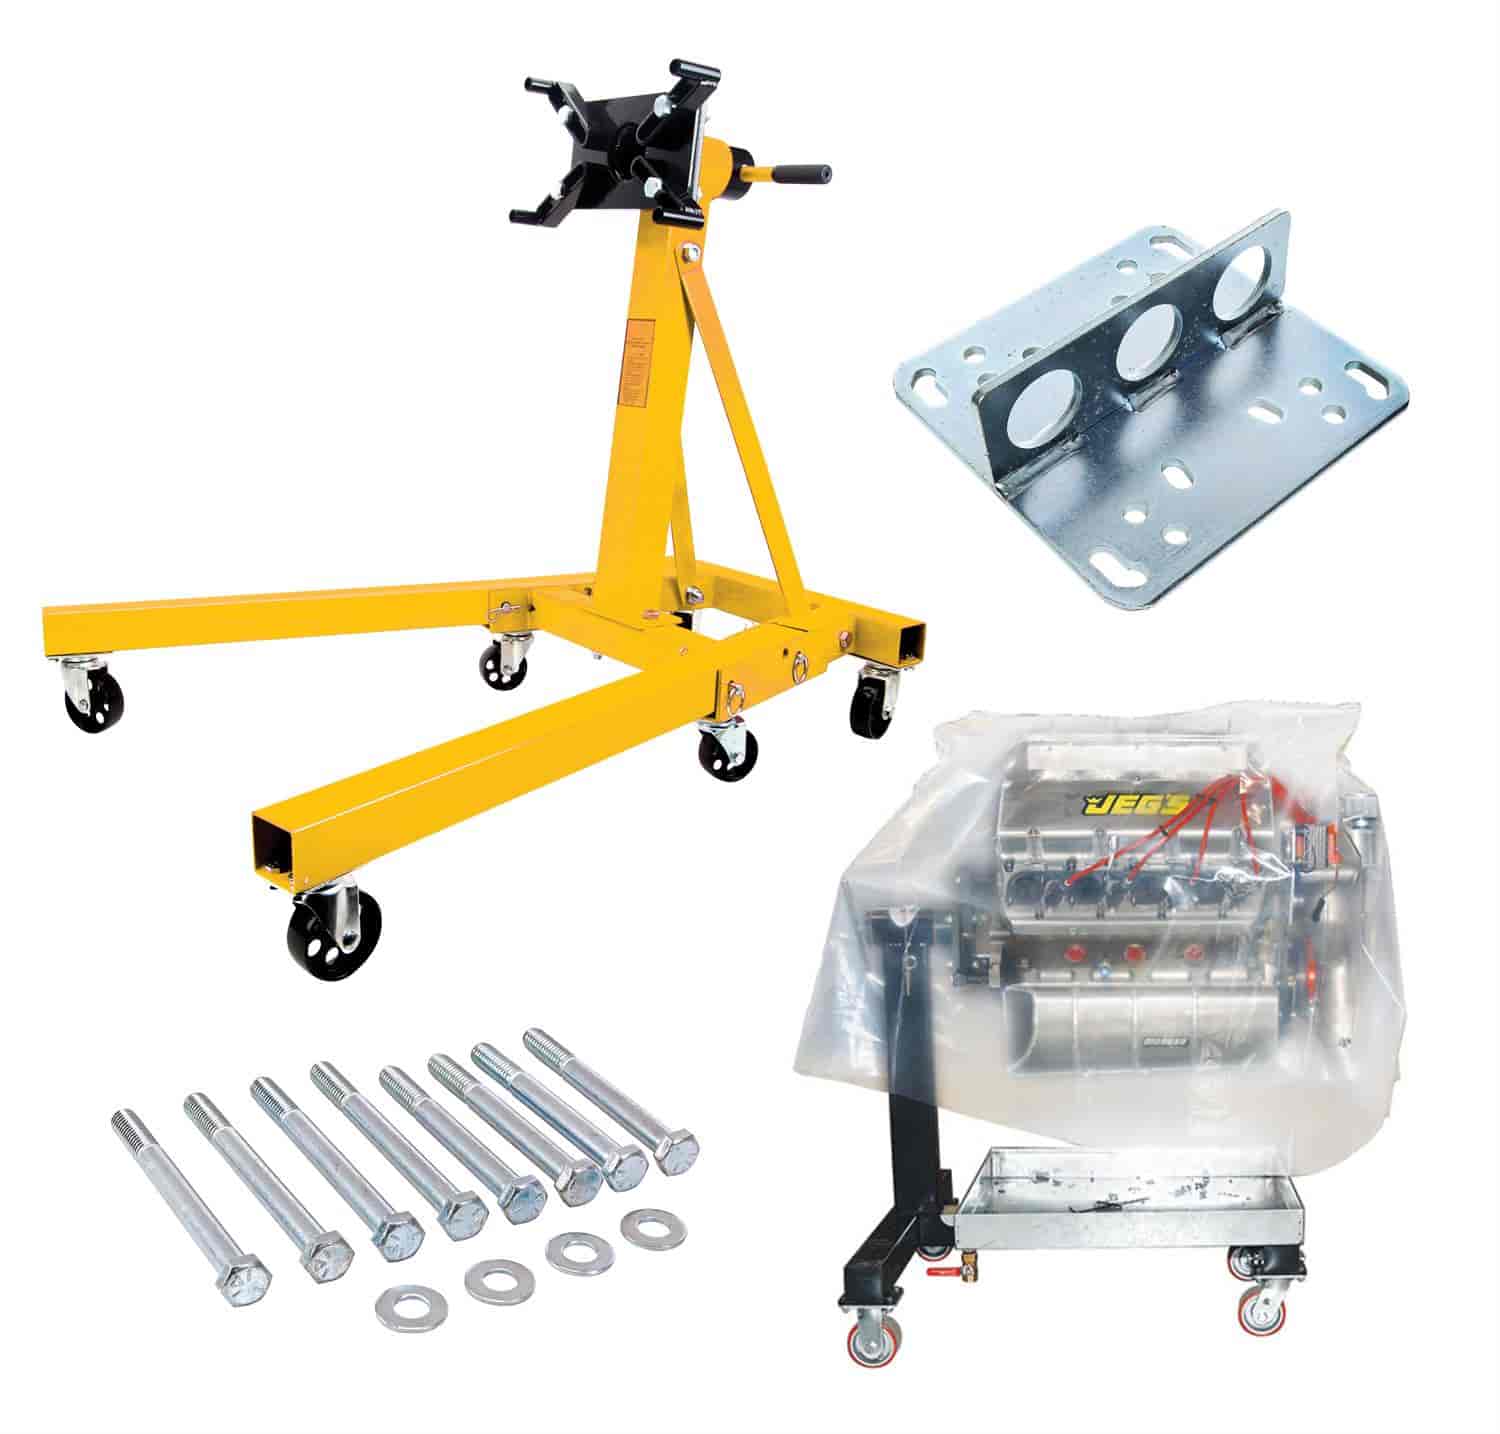 JEGS 80042K: Engine Stand Kit 2000 lbs. - JEGS